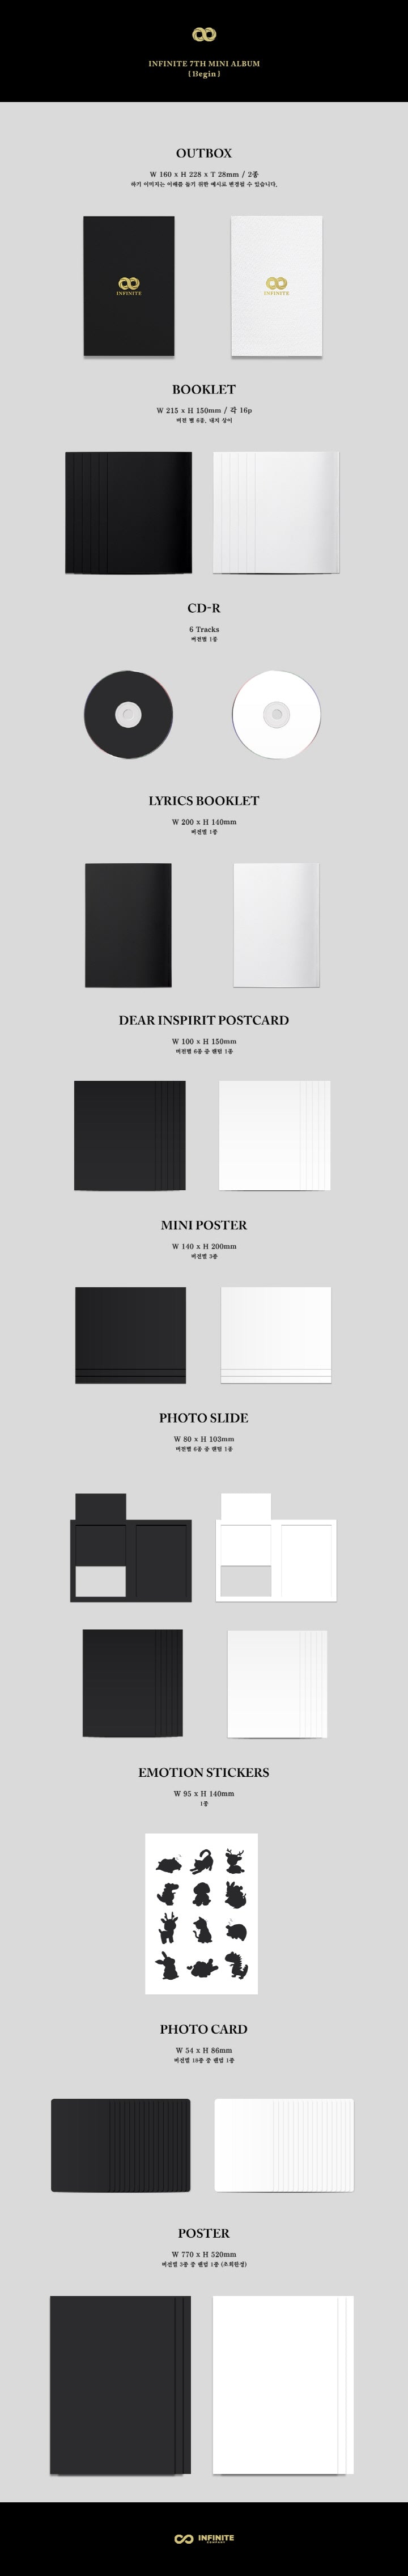 1 CD
1 Booklet (16 pages)
1 Lyrics Booklet
1 Dear Inspirit Postcard (random out of 6 types)
3 Mini Posters
1 Photo Slide (...